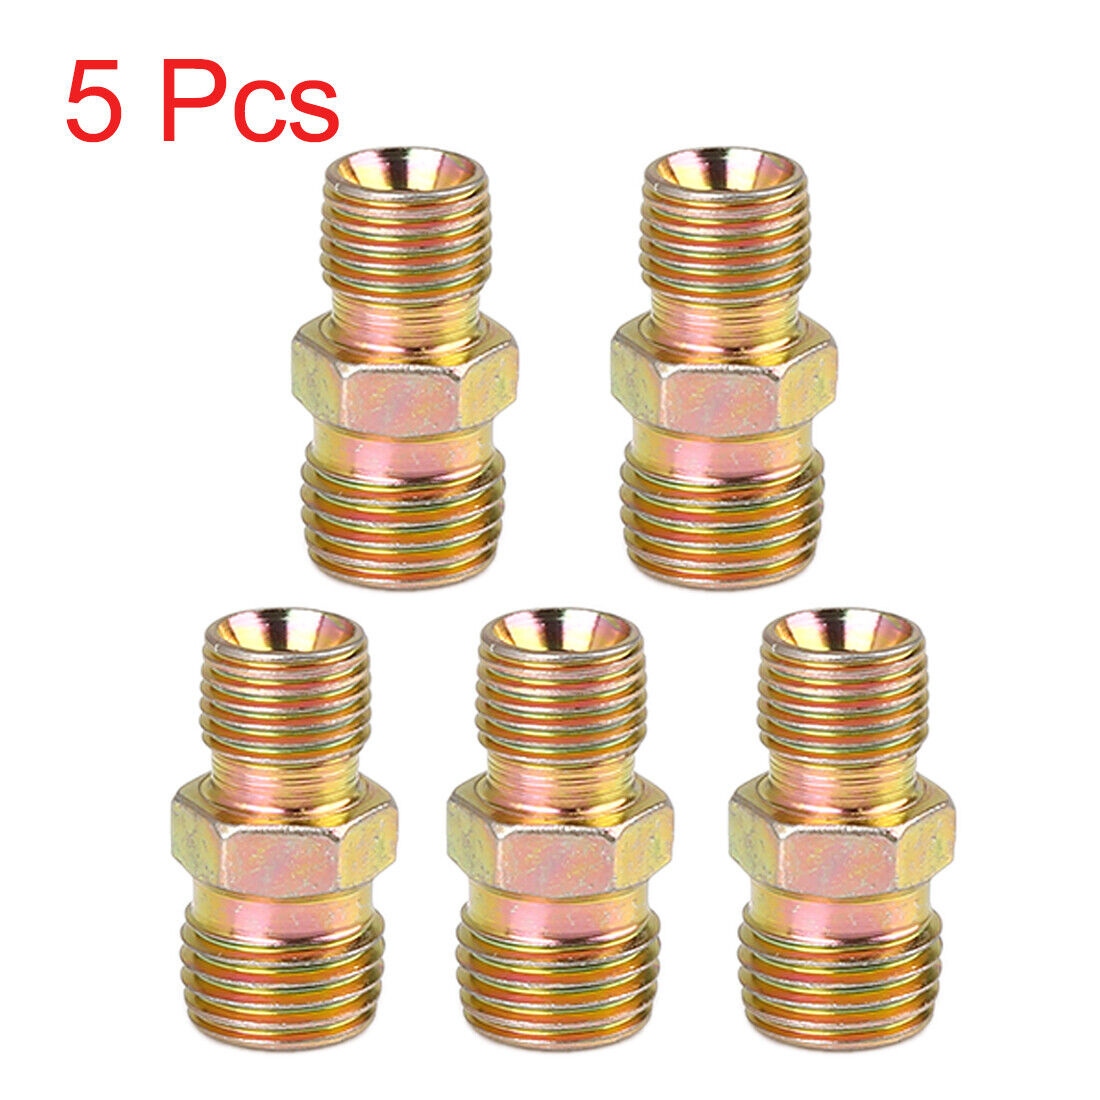 5pcs M10 to M12 x 1.25mm Male Car Straight Air Hose Fitting Connector Adapter